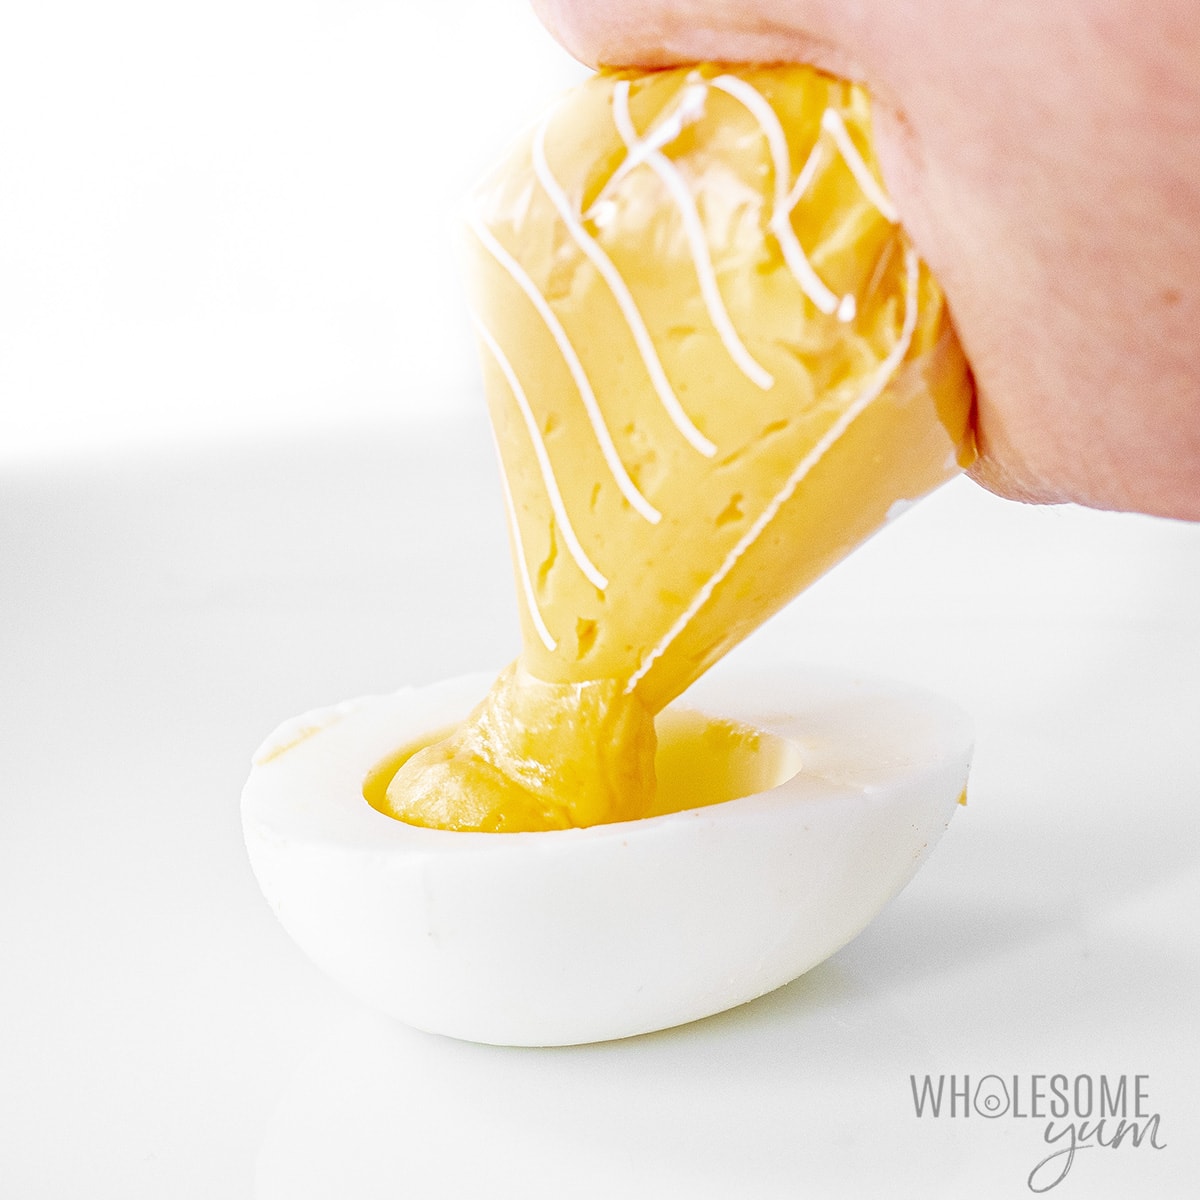 Yolk mixture in a piping bag being piped into sliced egg white.